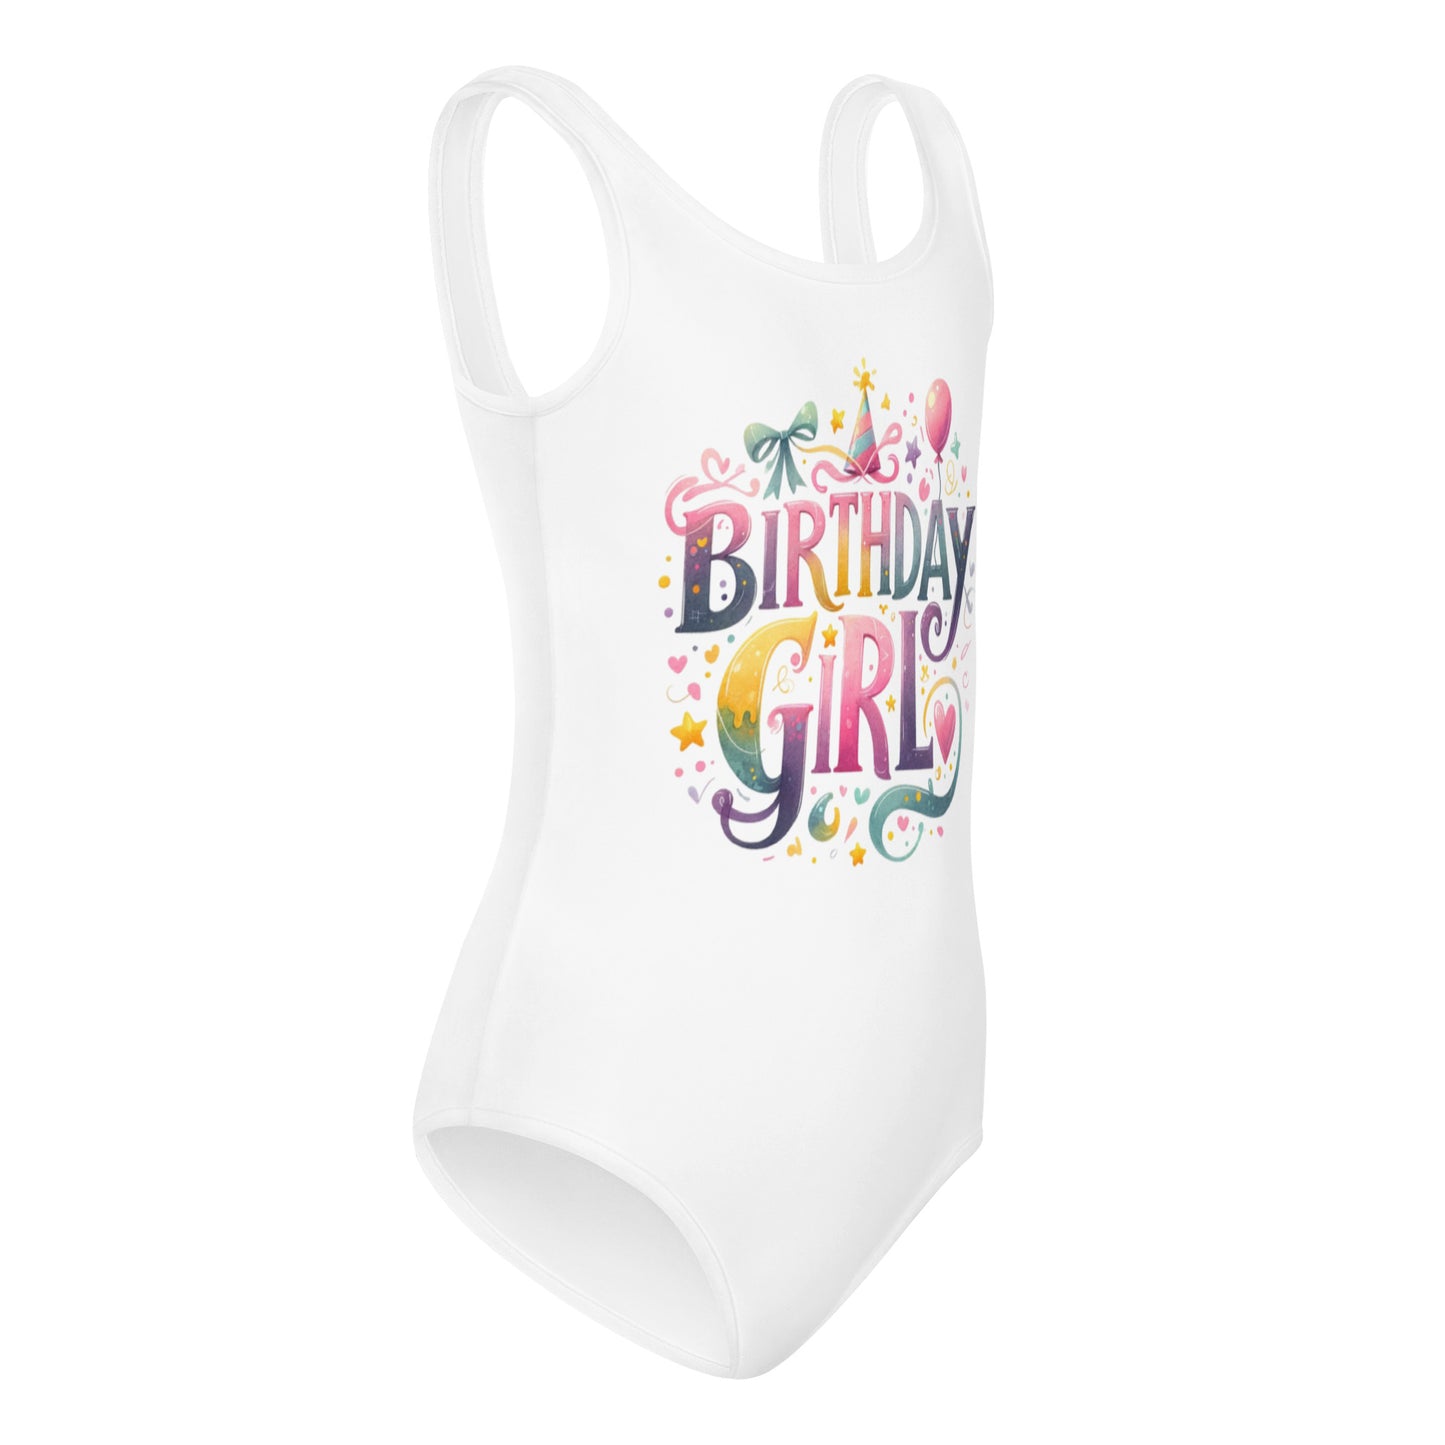 Birthday Girl Kids Girls Swimsuits (2T - 7), Rainbow Watercolor Party Festive Little Toddler One Piece Bathing Suit Swimming Swim